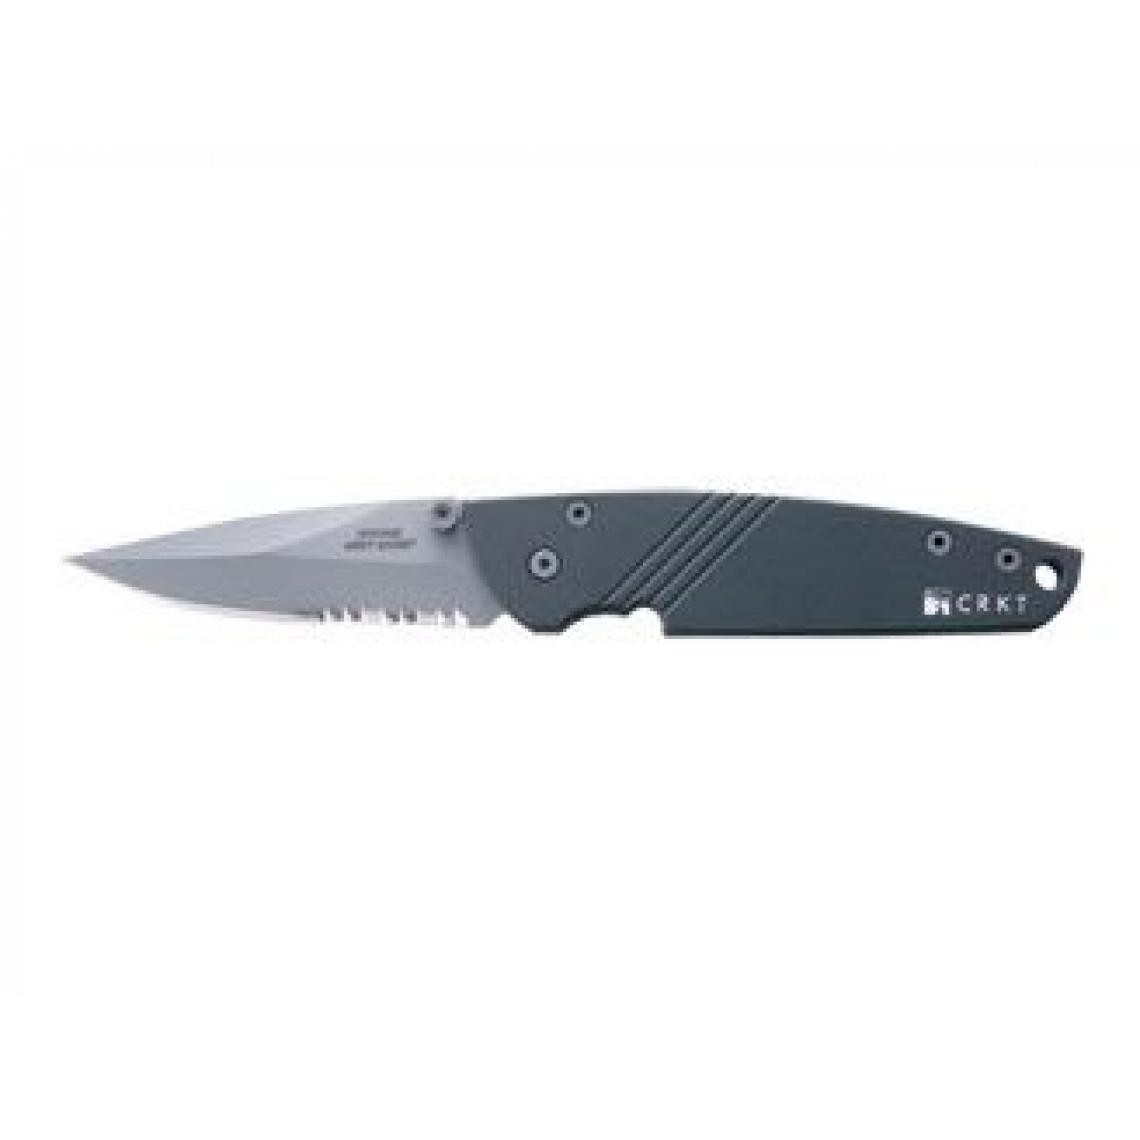 Crkt - Crkt MIRAGE GRAY GHOST 7812 COMBO - Outils de coupe